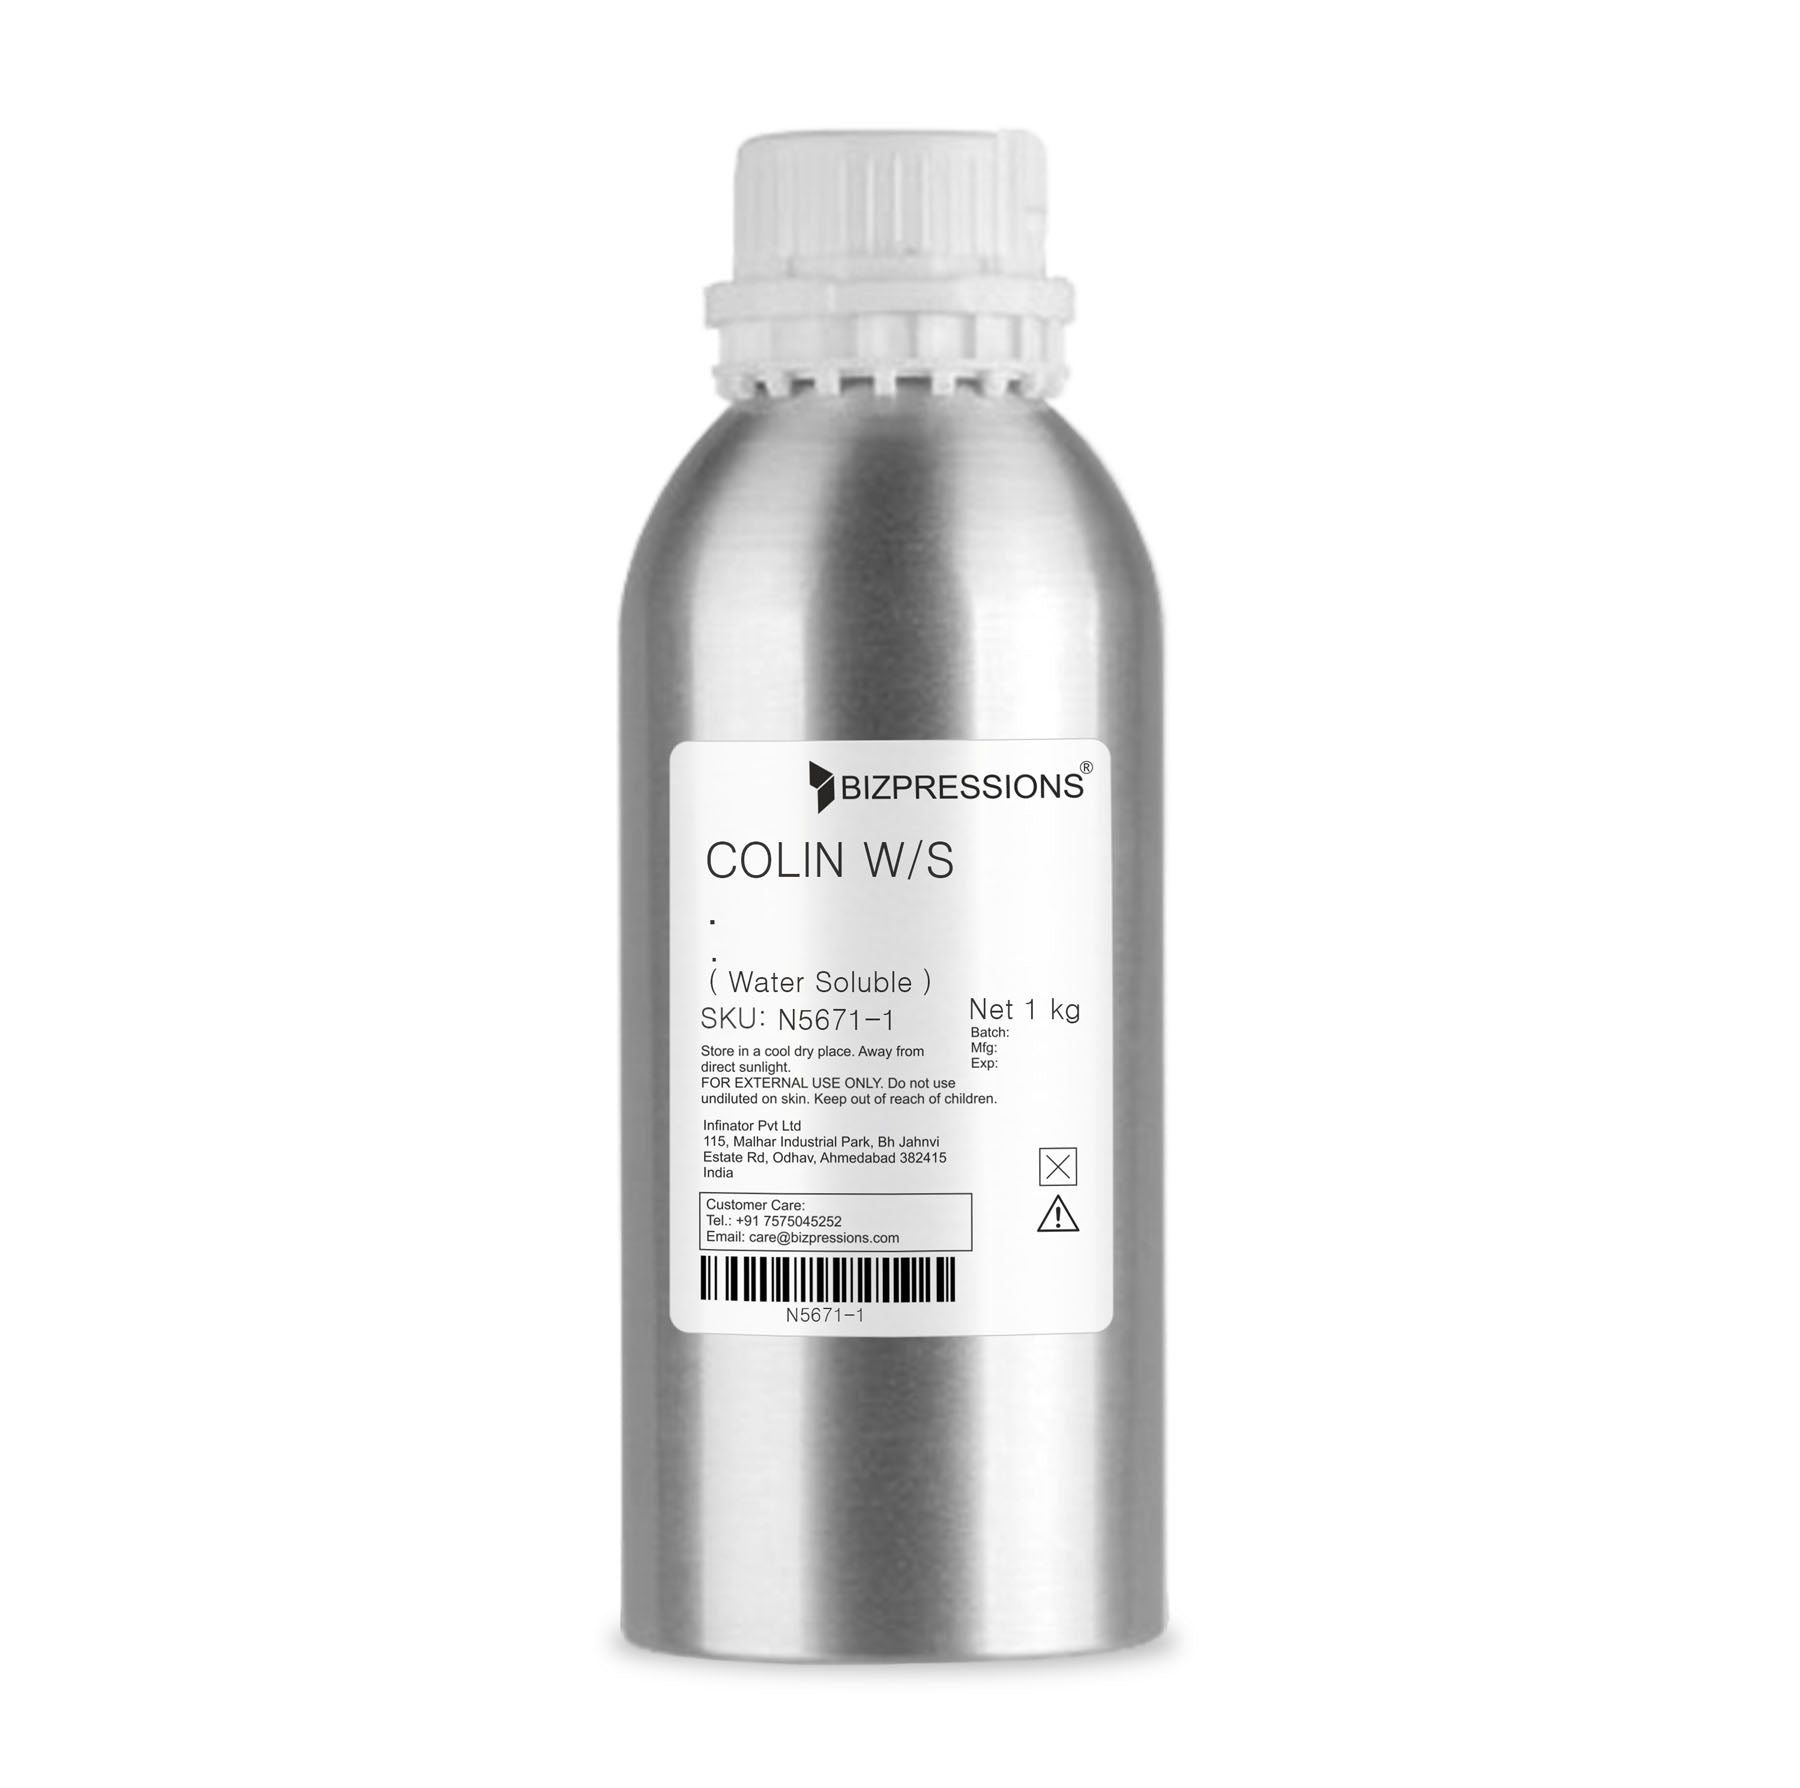 COLIN W/S - Fragrance ( Water Soluble ) - 1 kg